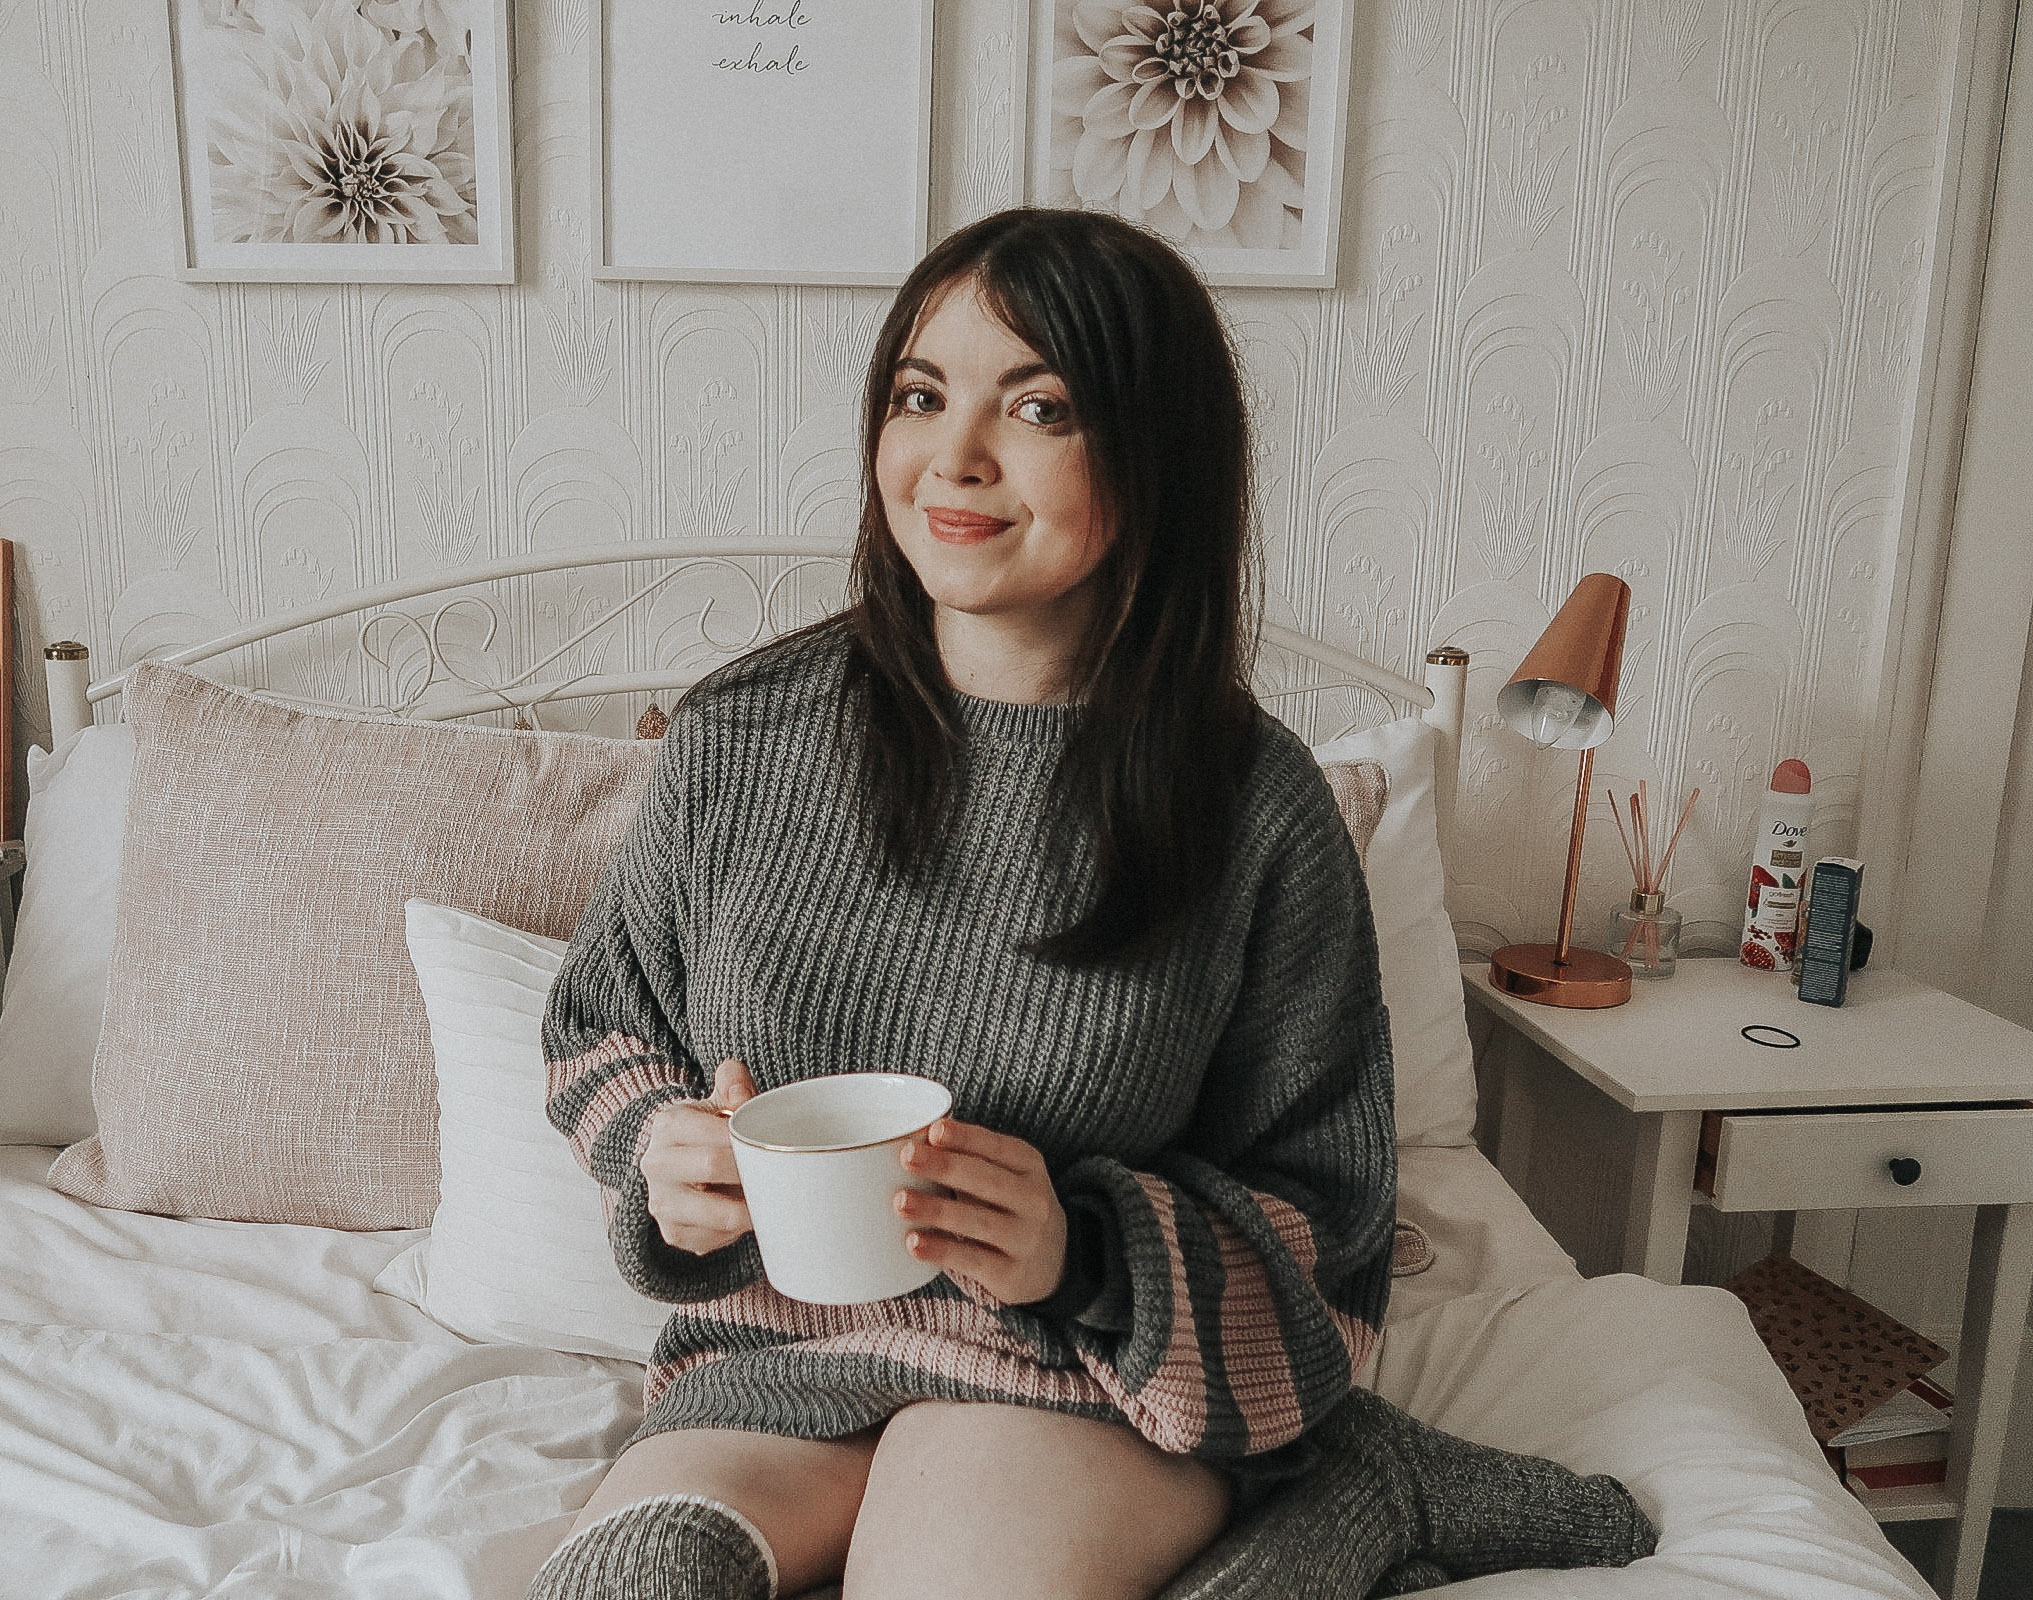 A woman in a grey and pink jumper holding a white mug.